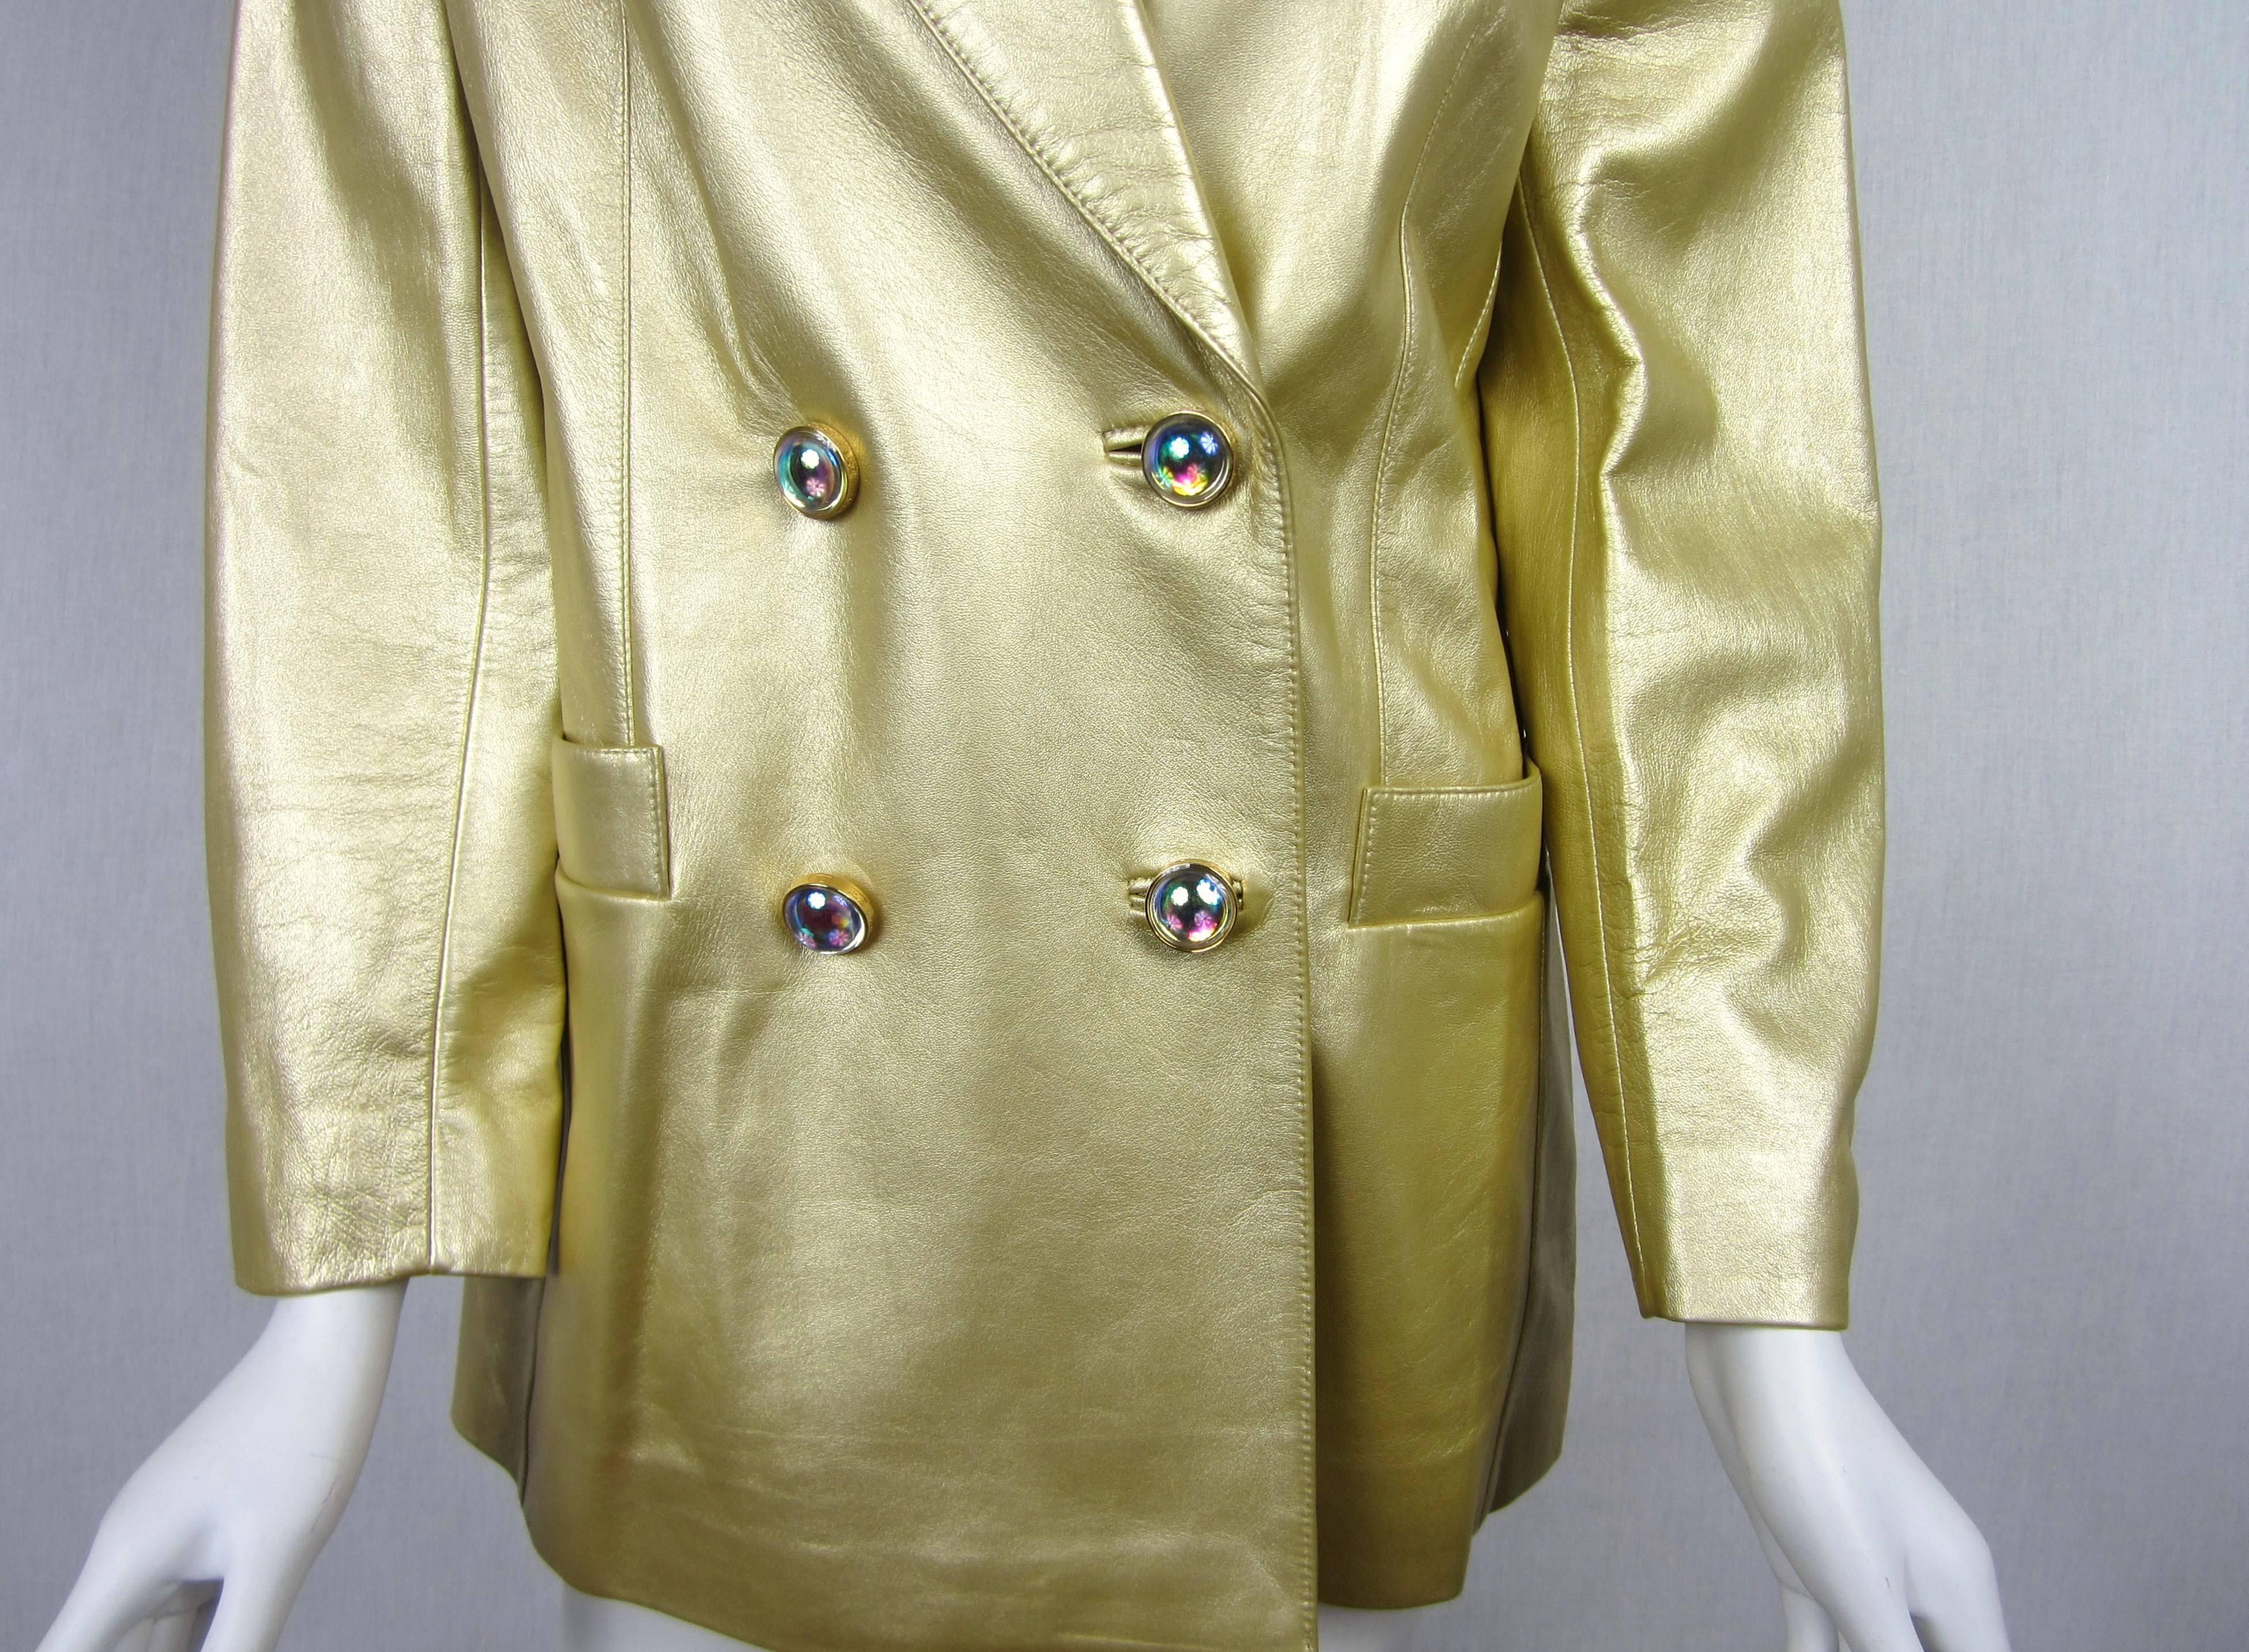 Fabulous Escada Gold Shimmering Leather Double Breasted Blazer. Stunning aurora borealis colored bubble buttons with Slit pockets, Lined. Shimmering Gold Leather. UK 38 Will fit a medium.   Please be sure to check our storefront for more fashion as